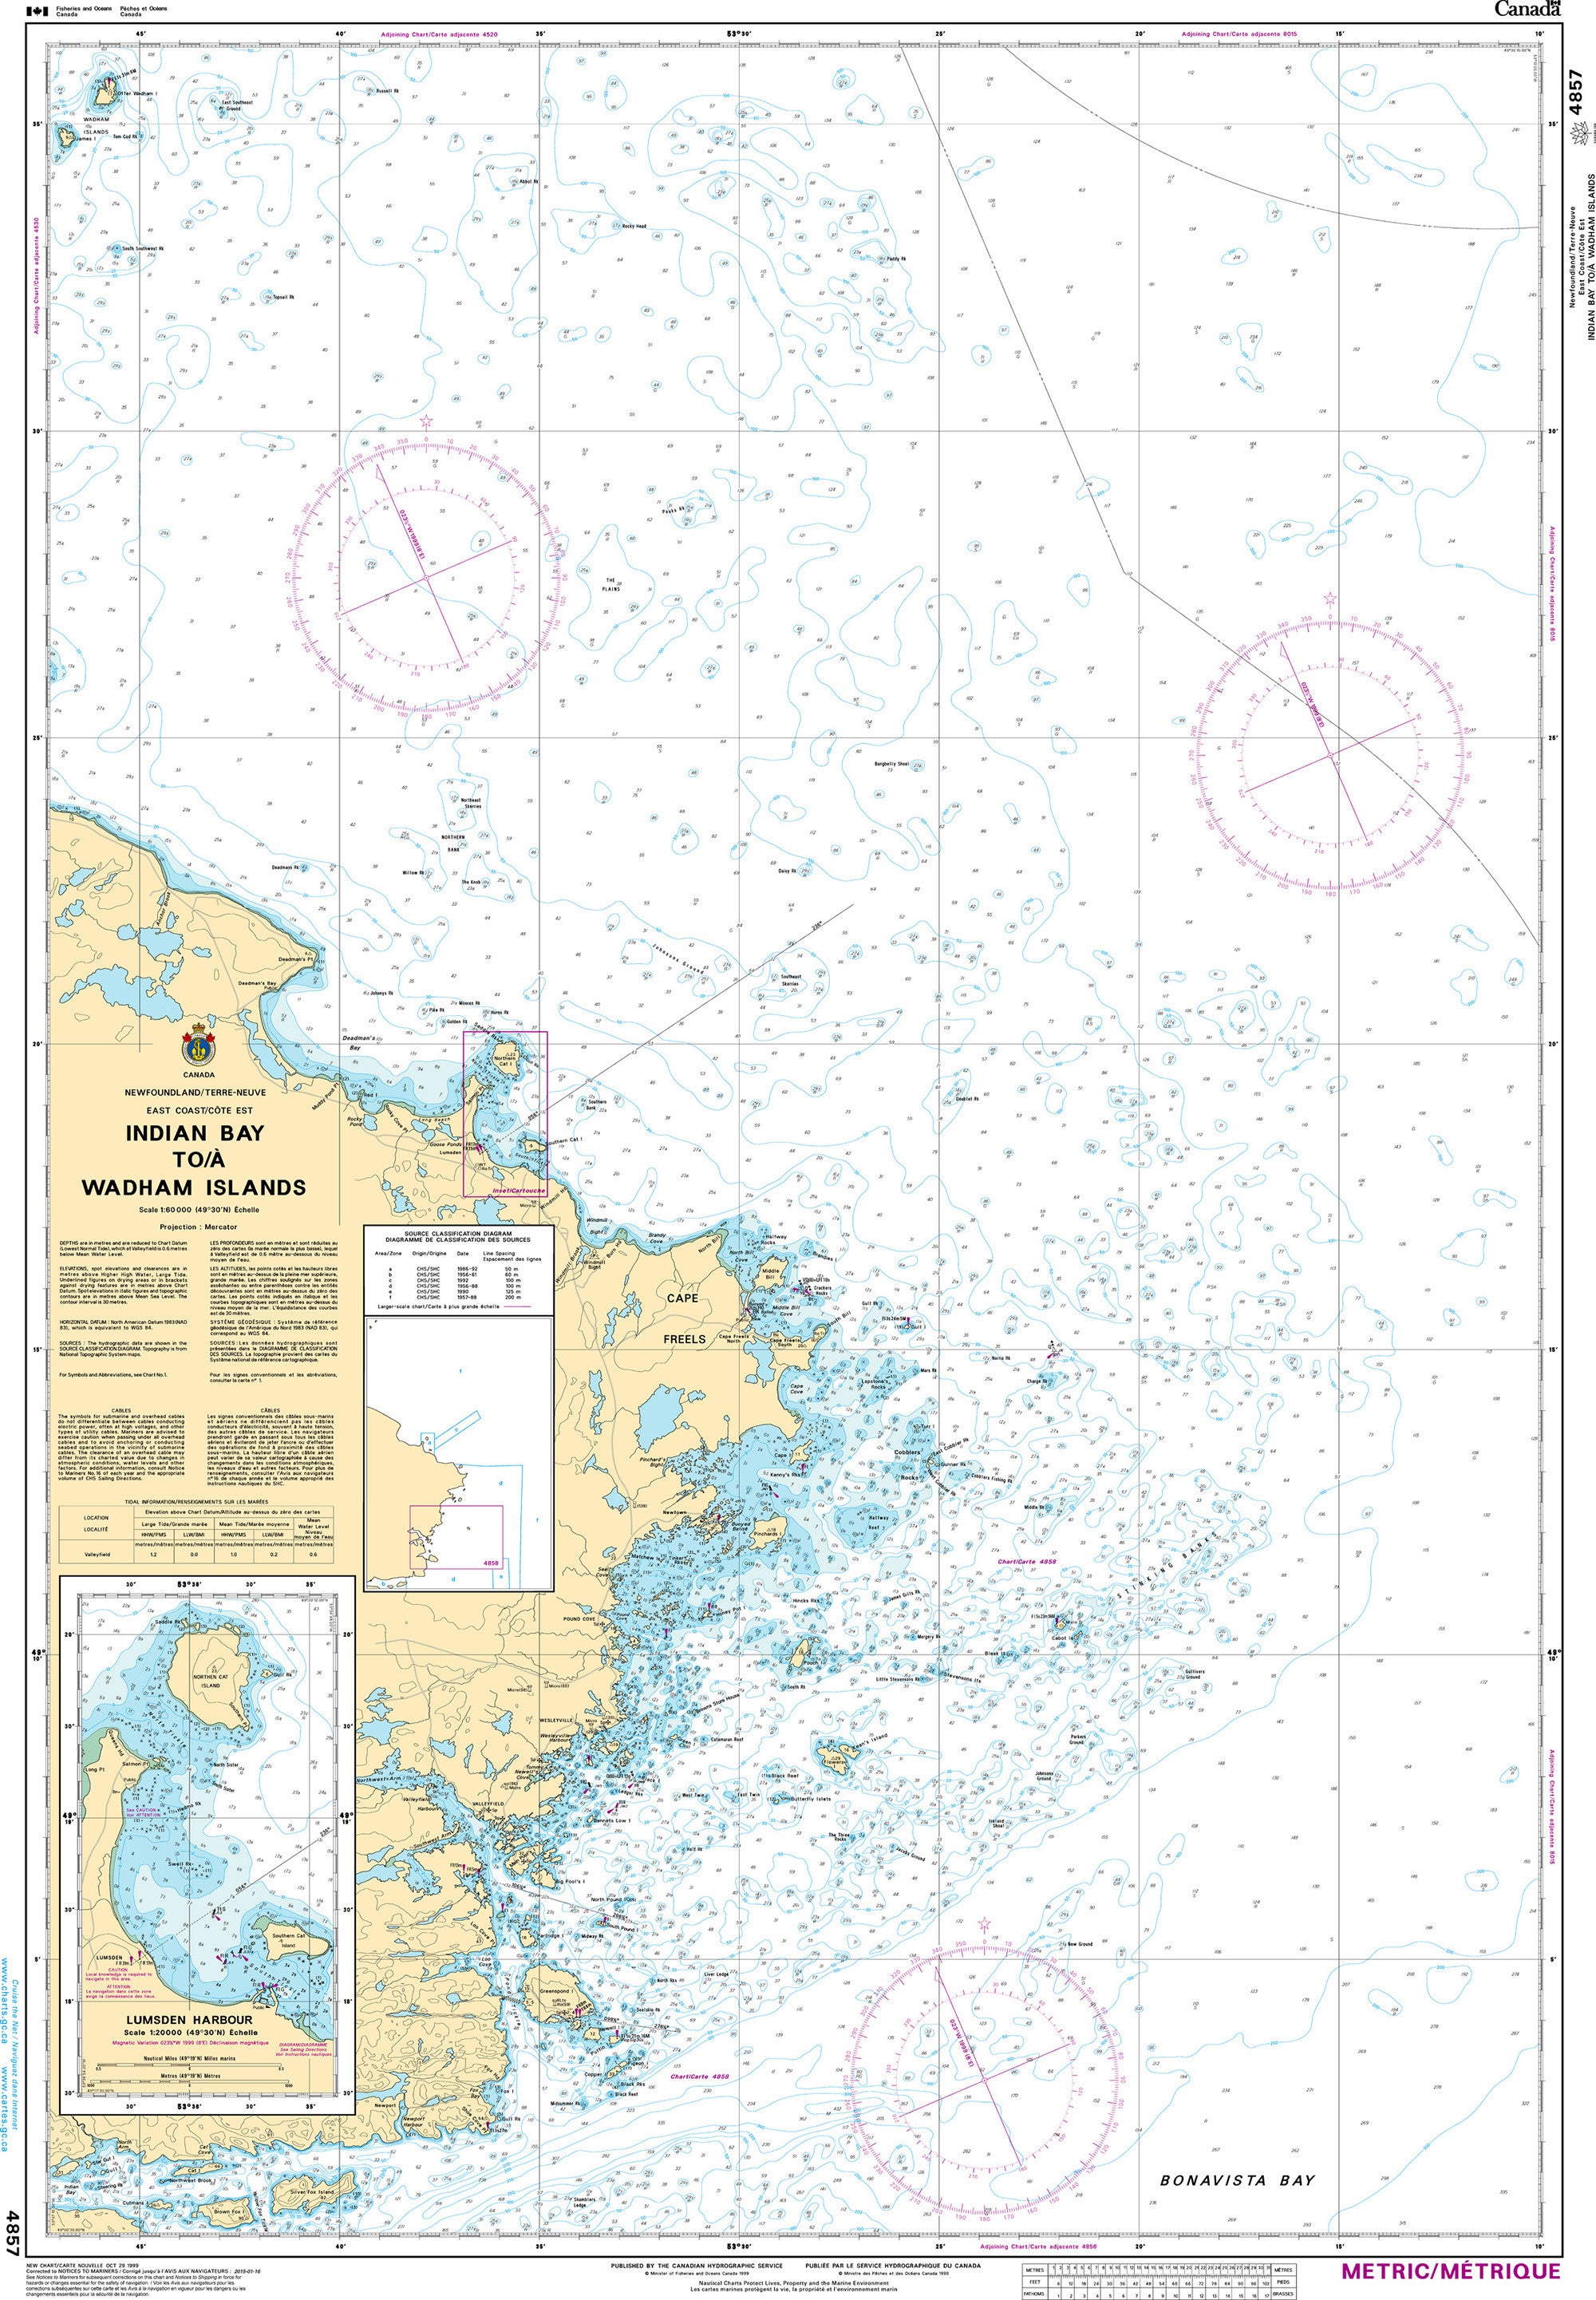 Canadian Hydrographic Service Nautical Chart CHS4857: Indian Bay to/à Wadham Islands